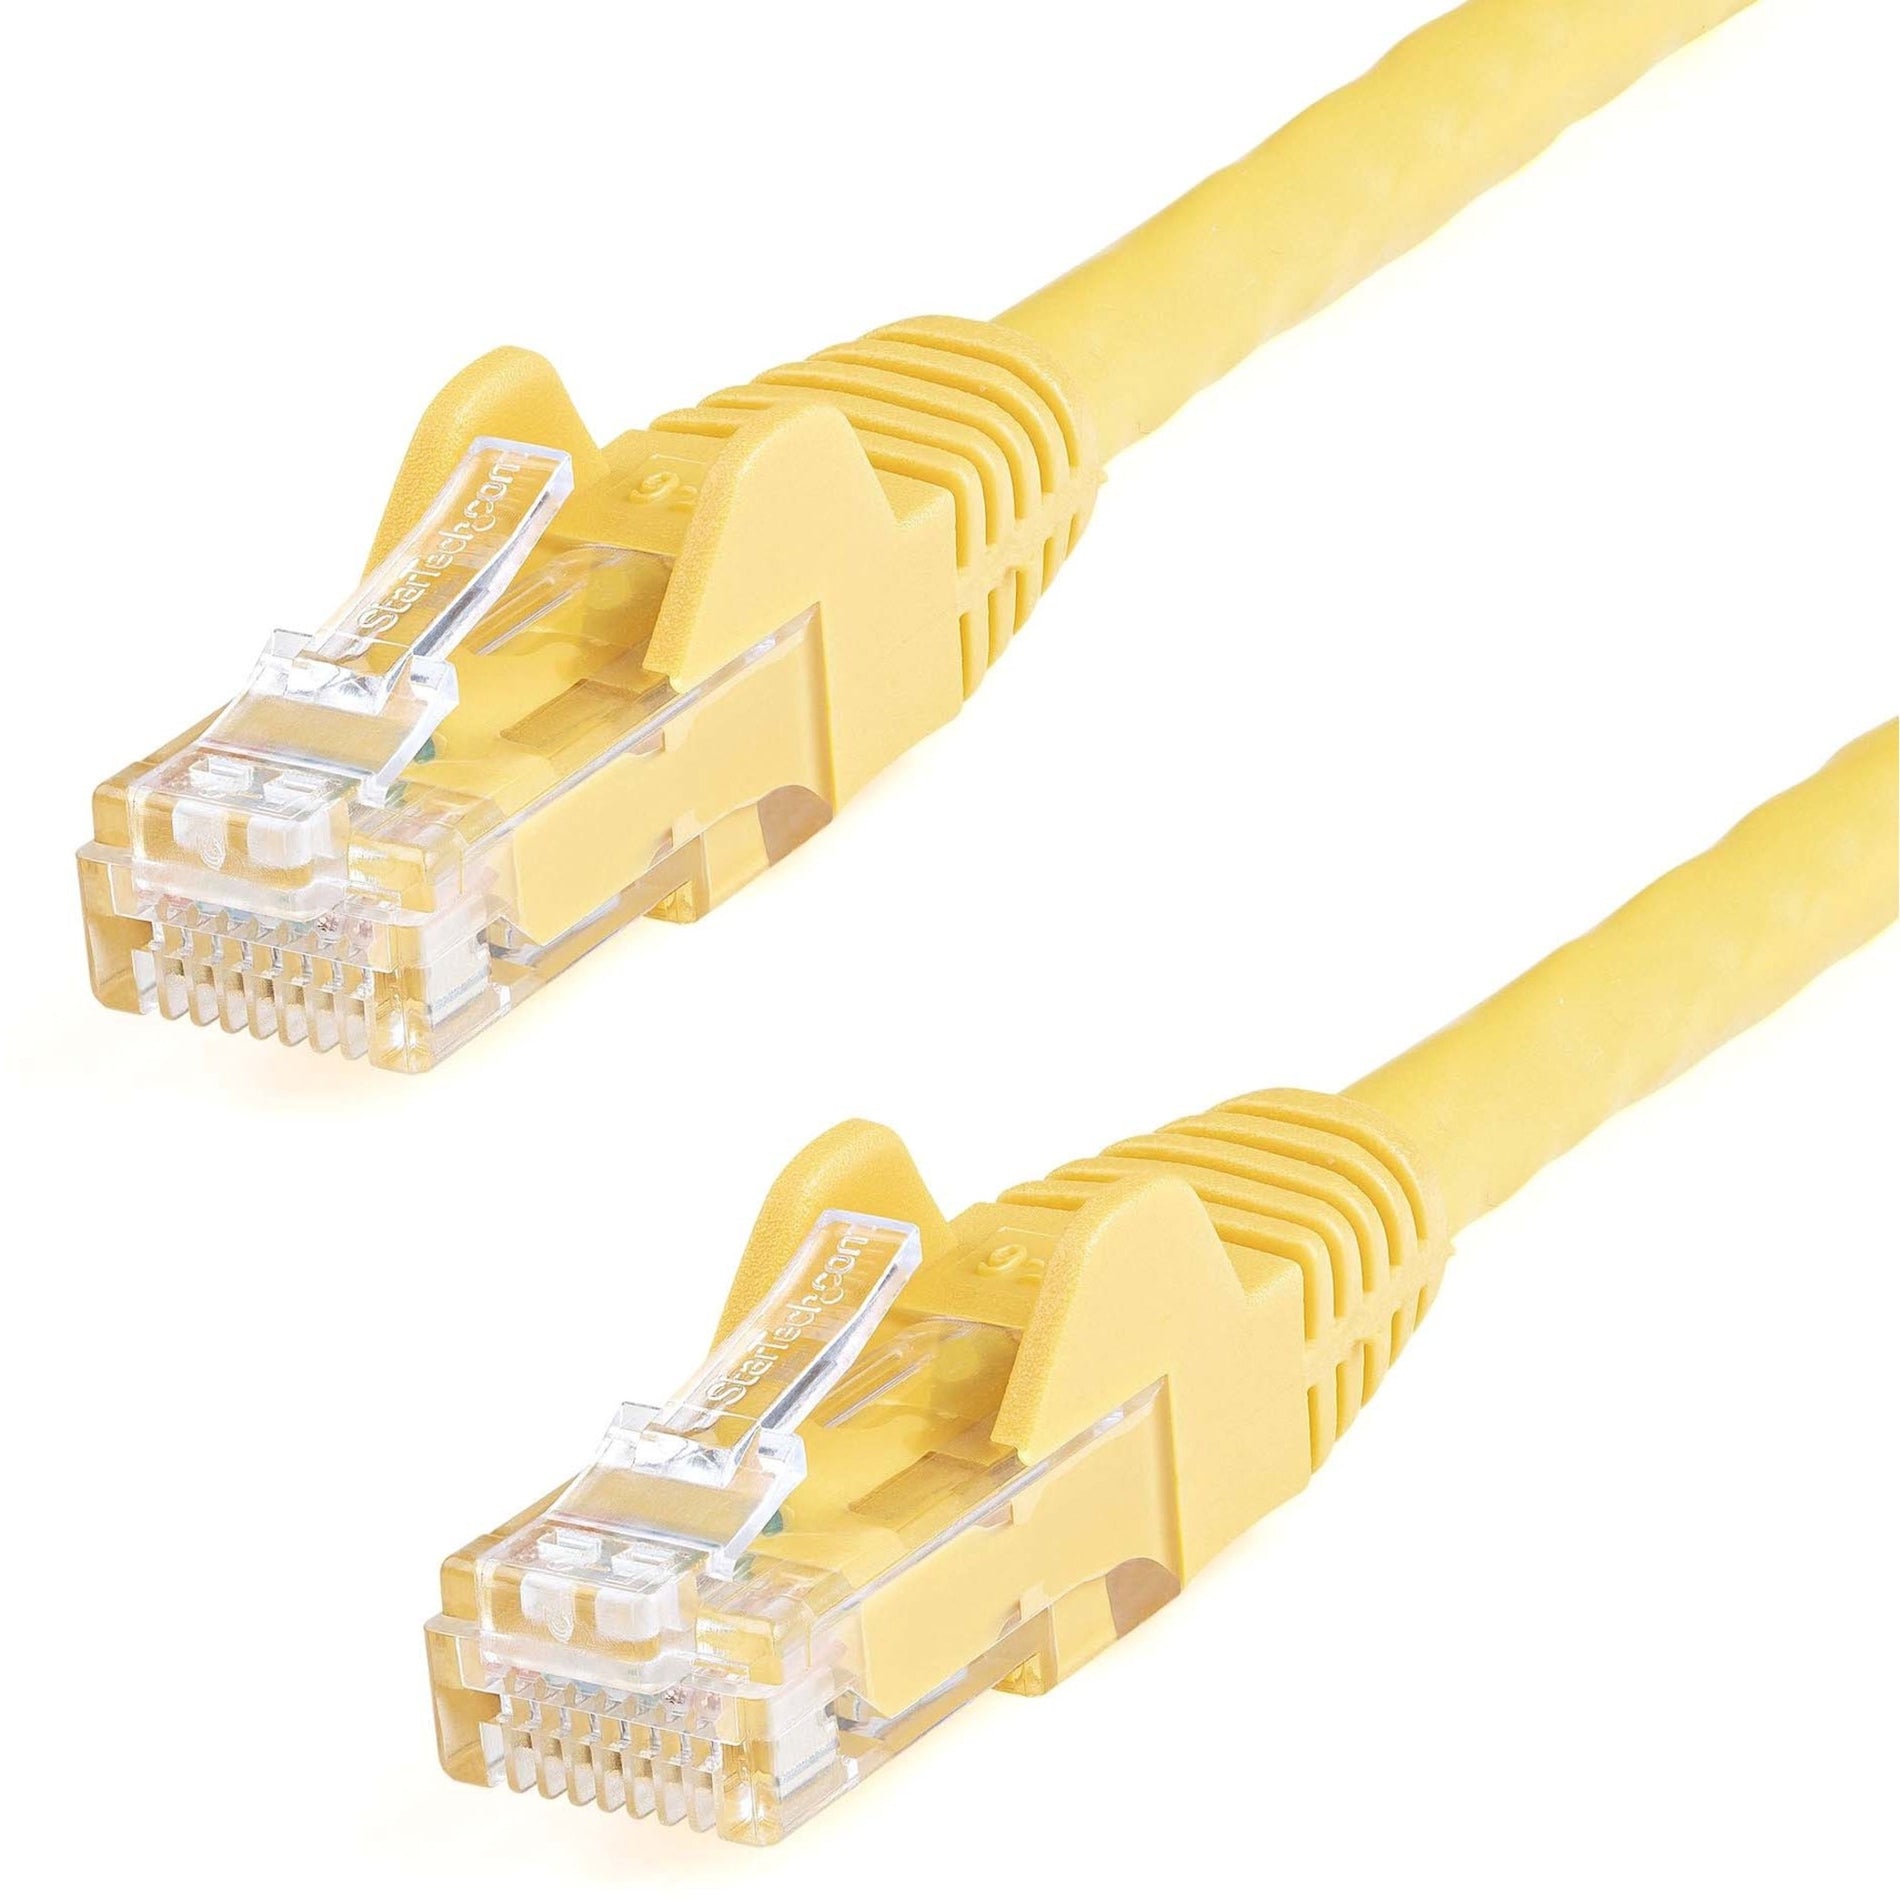 StarTech.com N6PATCH5YL Cat6 Patch Cable, 5ft Yellow Ethernet Cable, Snagless RJ45 Connectors